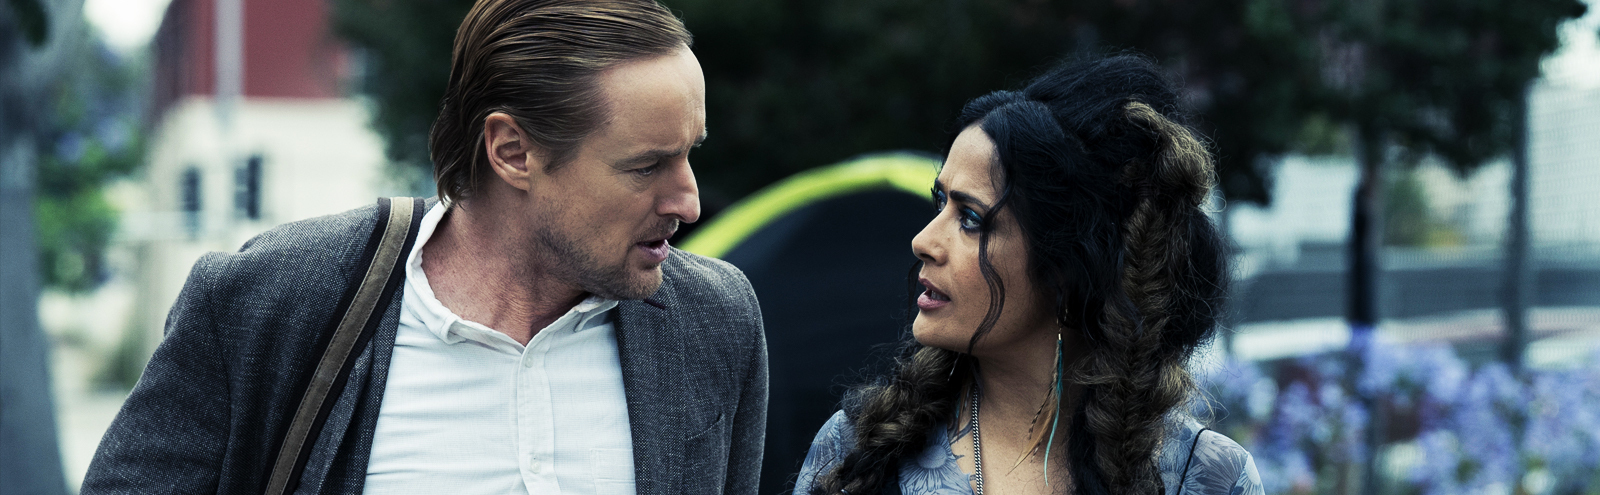 ‘Bliss’ Director Mike Cahill On Why Salma Hayek Is The Storm And Owen Wilson Is The Life Boat